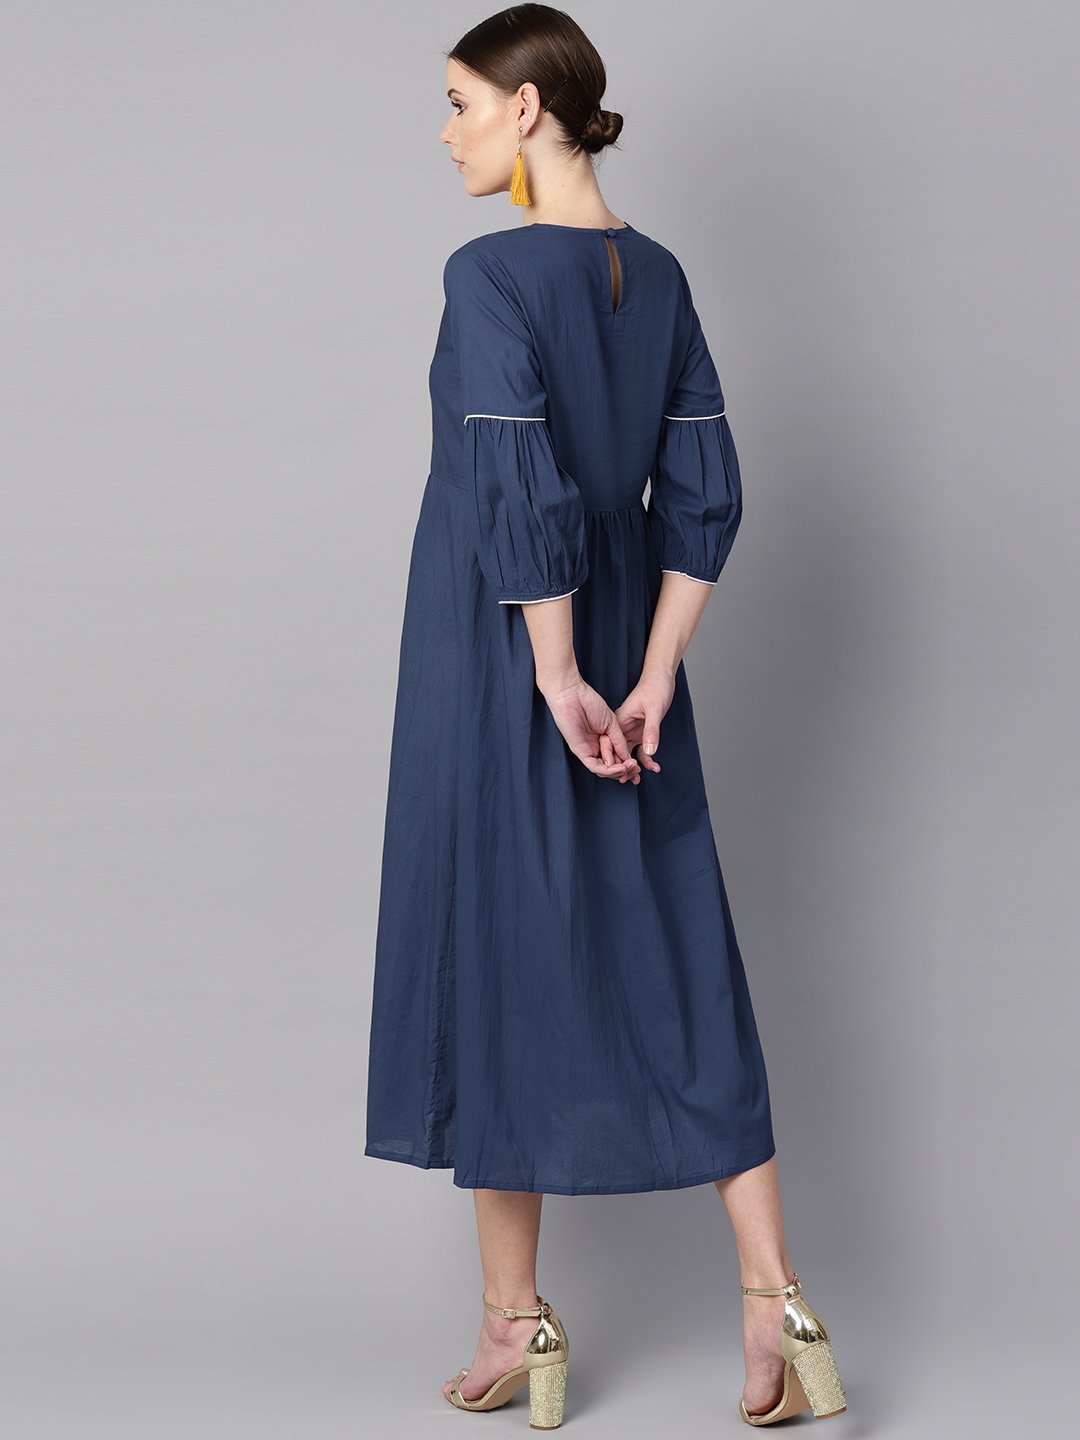 Women's Solid Blue Dress With Front Printed Yoke & Pleated Sleeves - Nayo Clothing